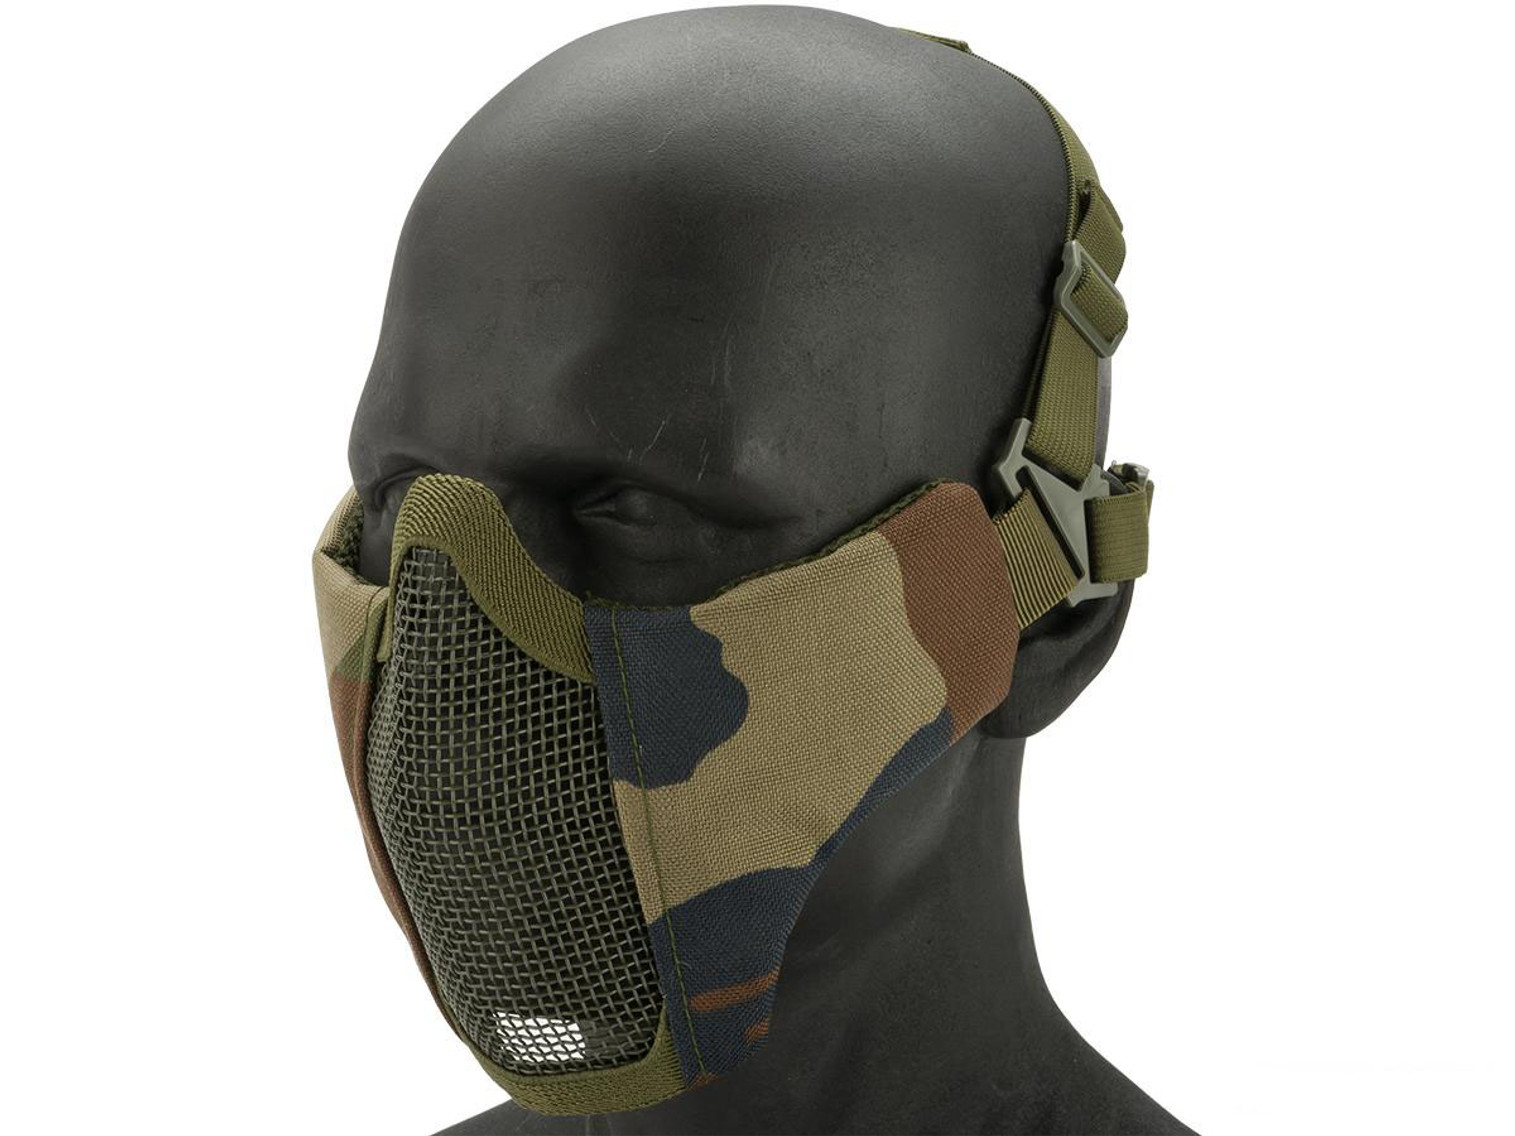 Matrix Low Profile Iron Face Padded Lower Half Face Mask (Color: Woodland)